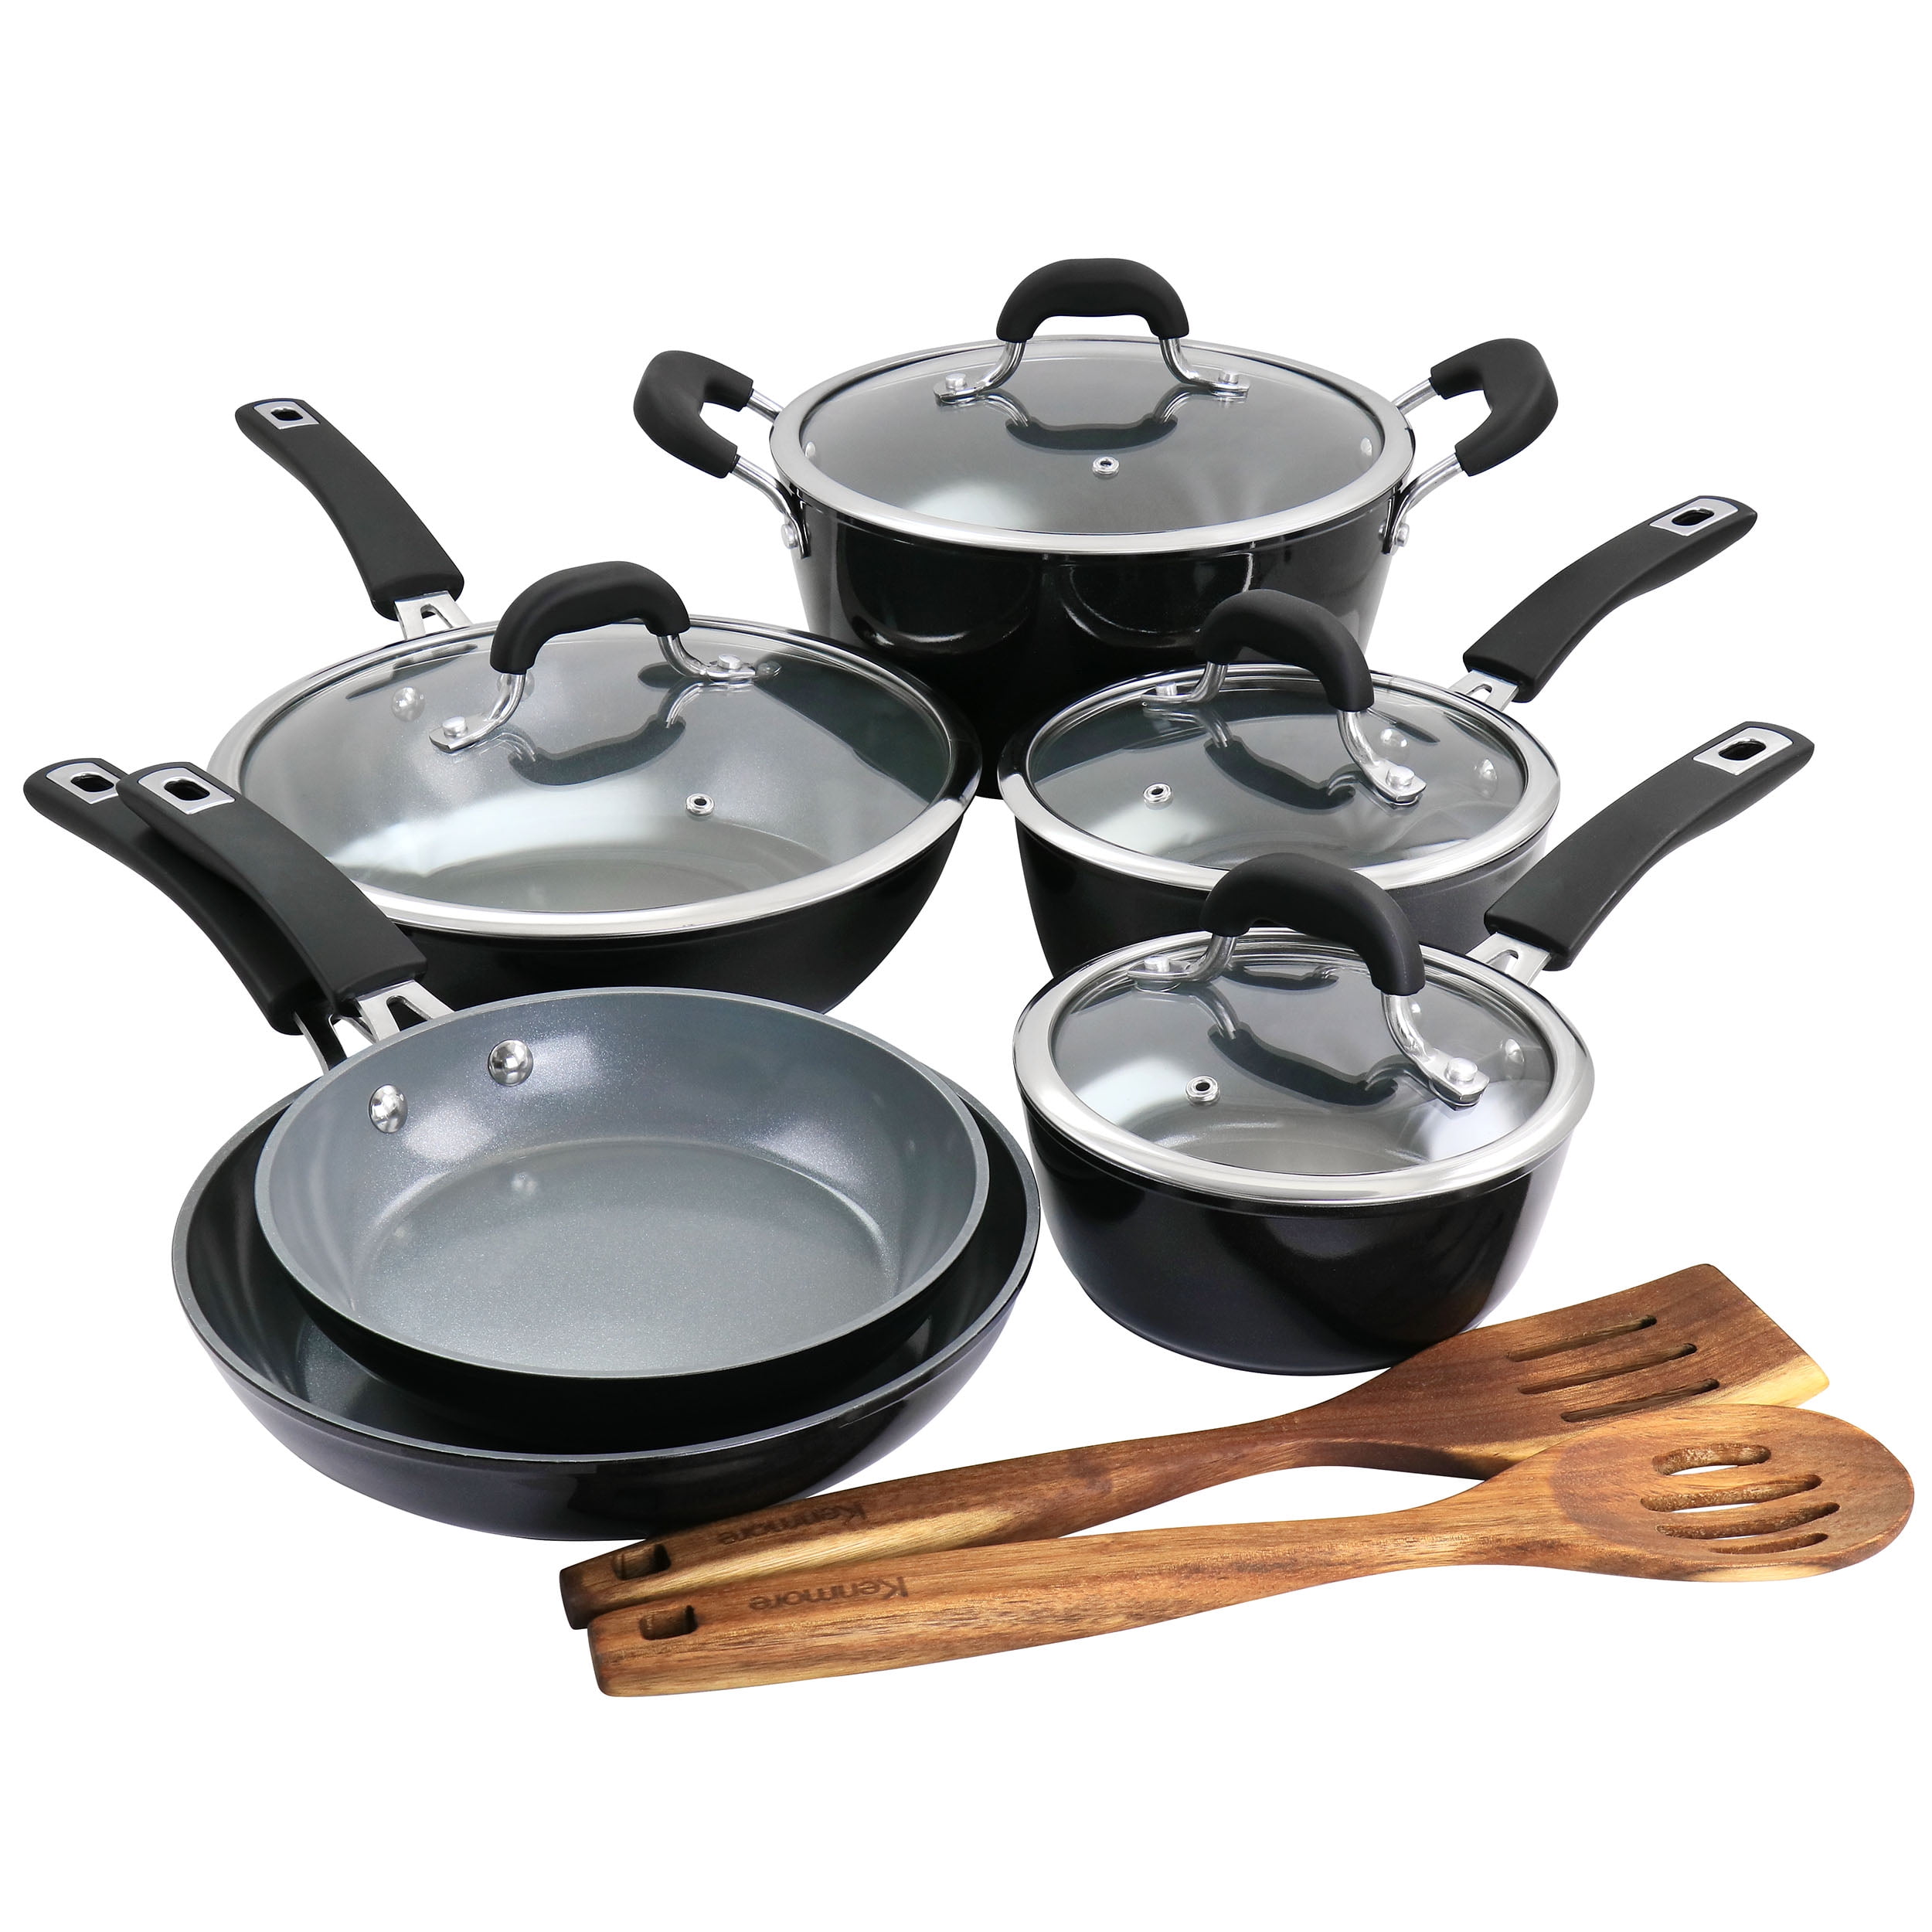 KENMORE Elite Andover 10-Piece Red Aluminum Non-Stick Cookware Set with Lids  985114036M - The Home Depot